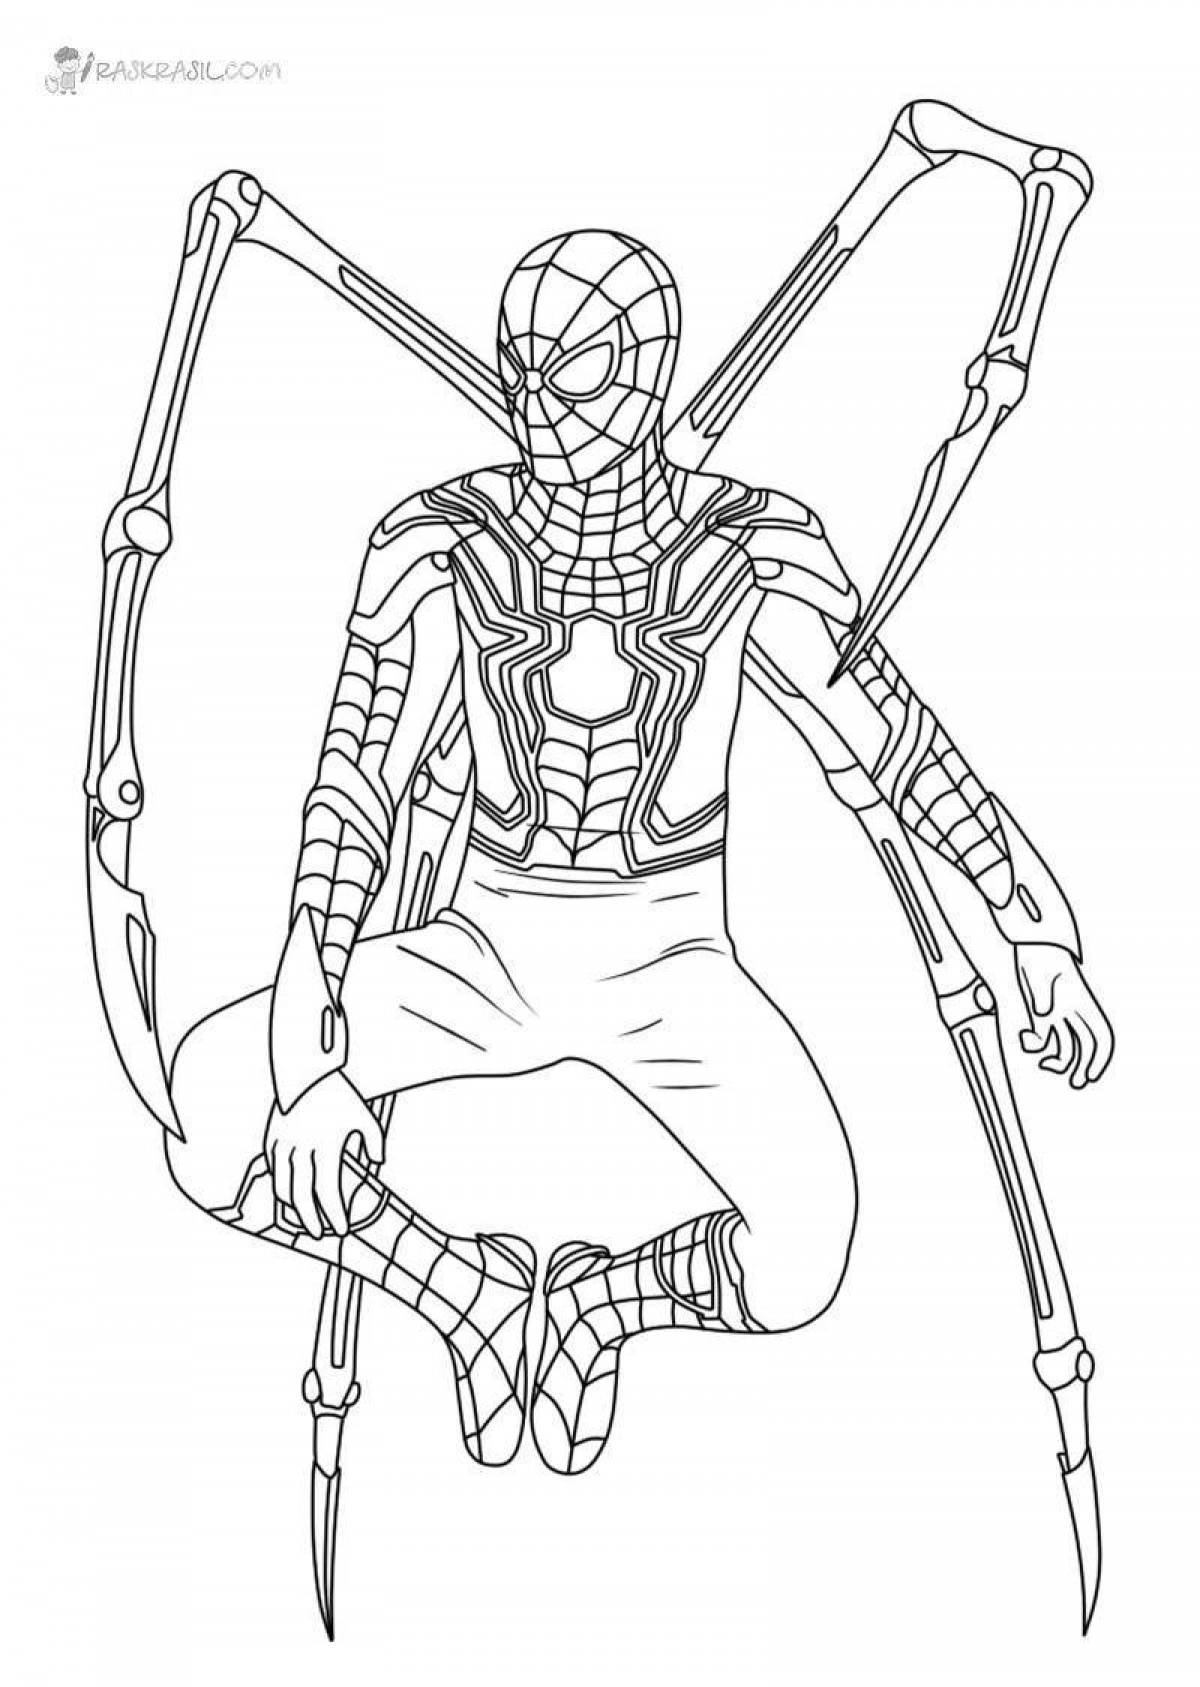 Spiderman's disturbing ghost coloring page